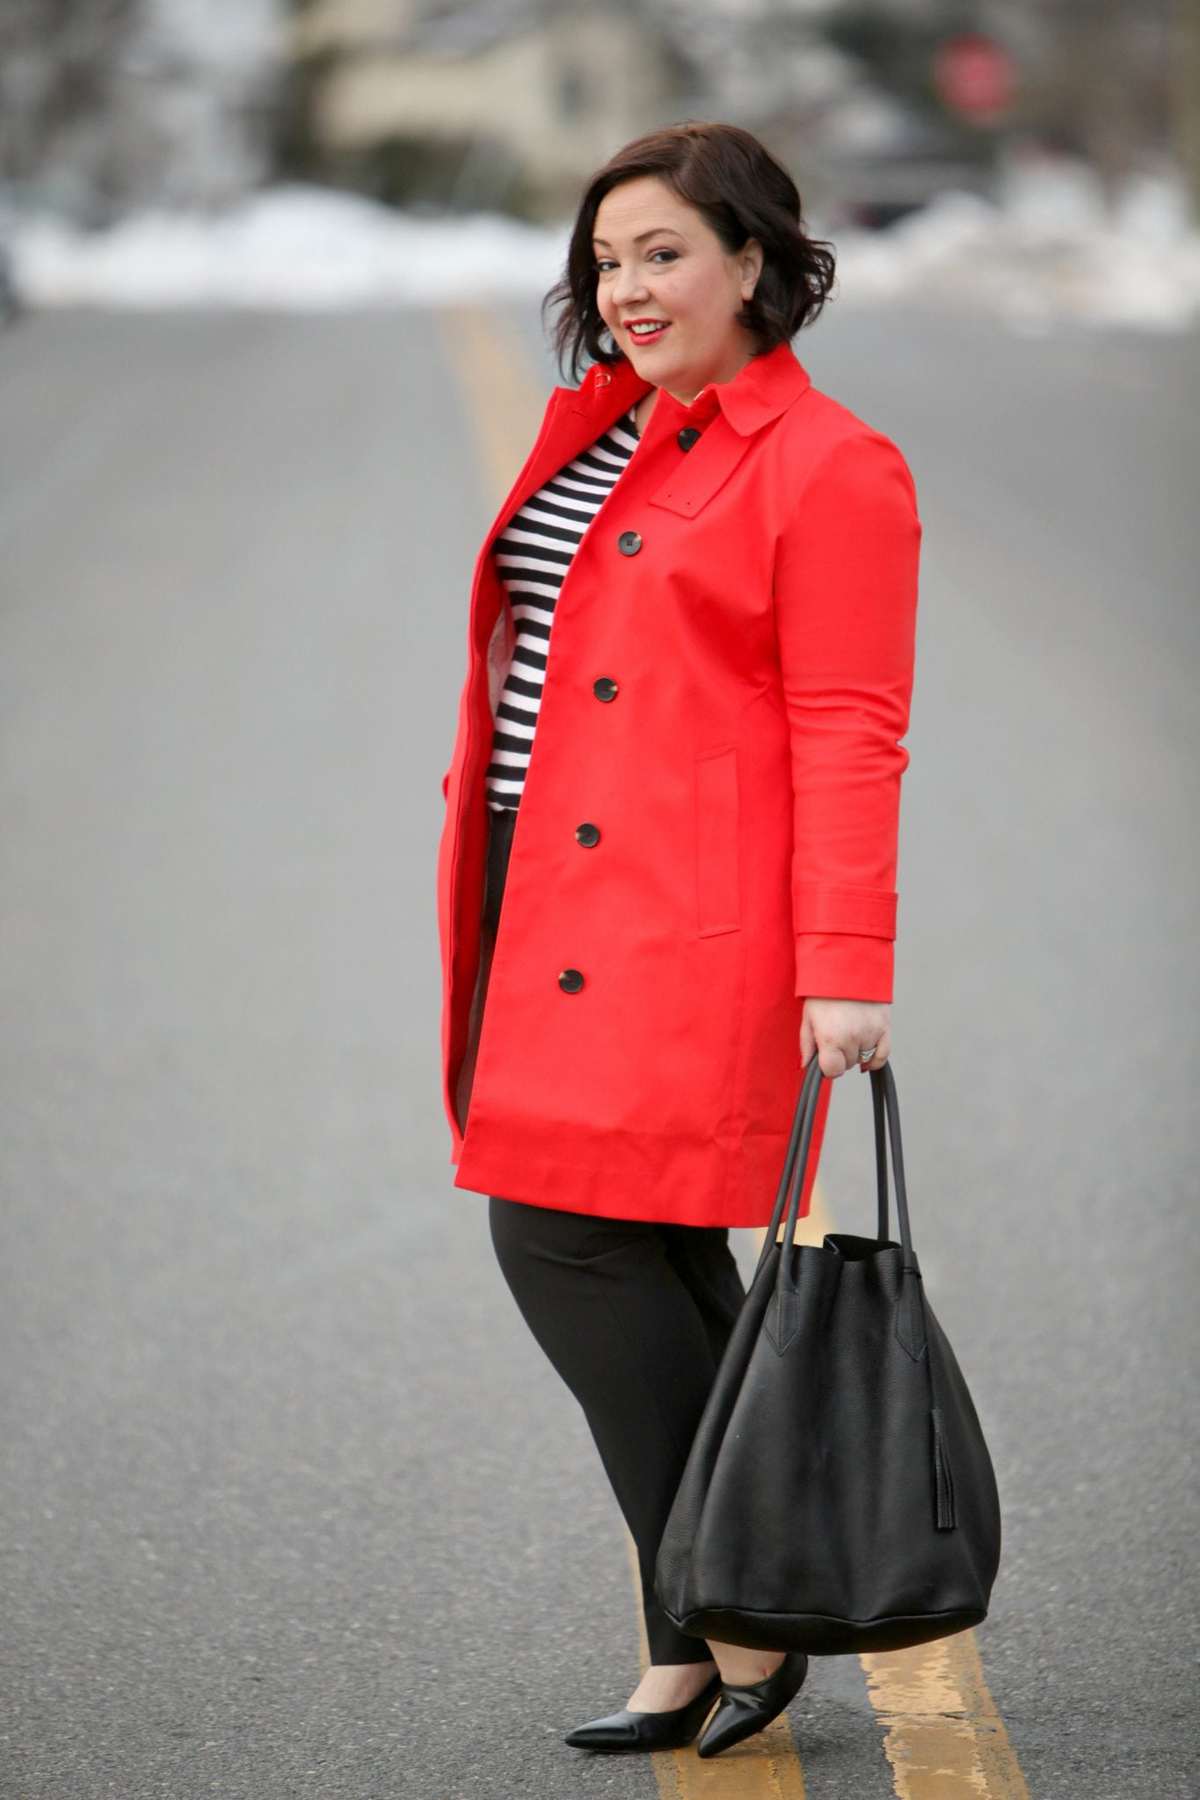 Wardrobe Oxygen featuring an orange Banana Republic trench and a black tote from Adora Bags